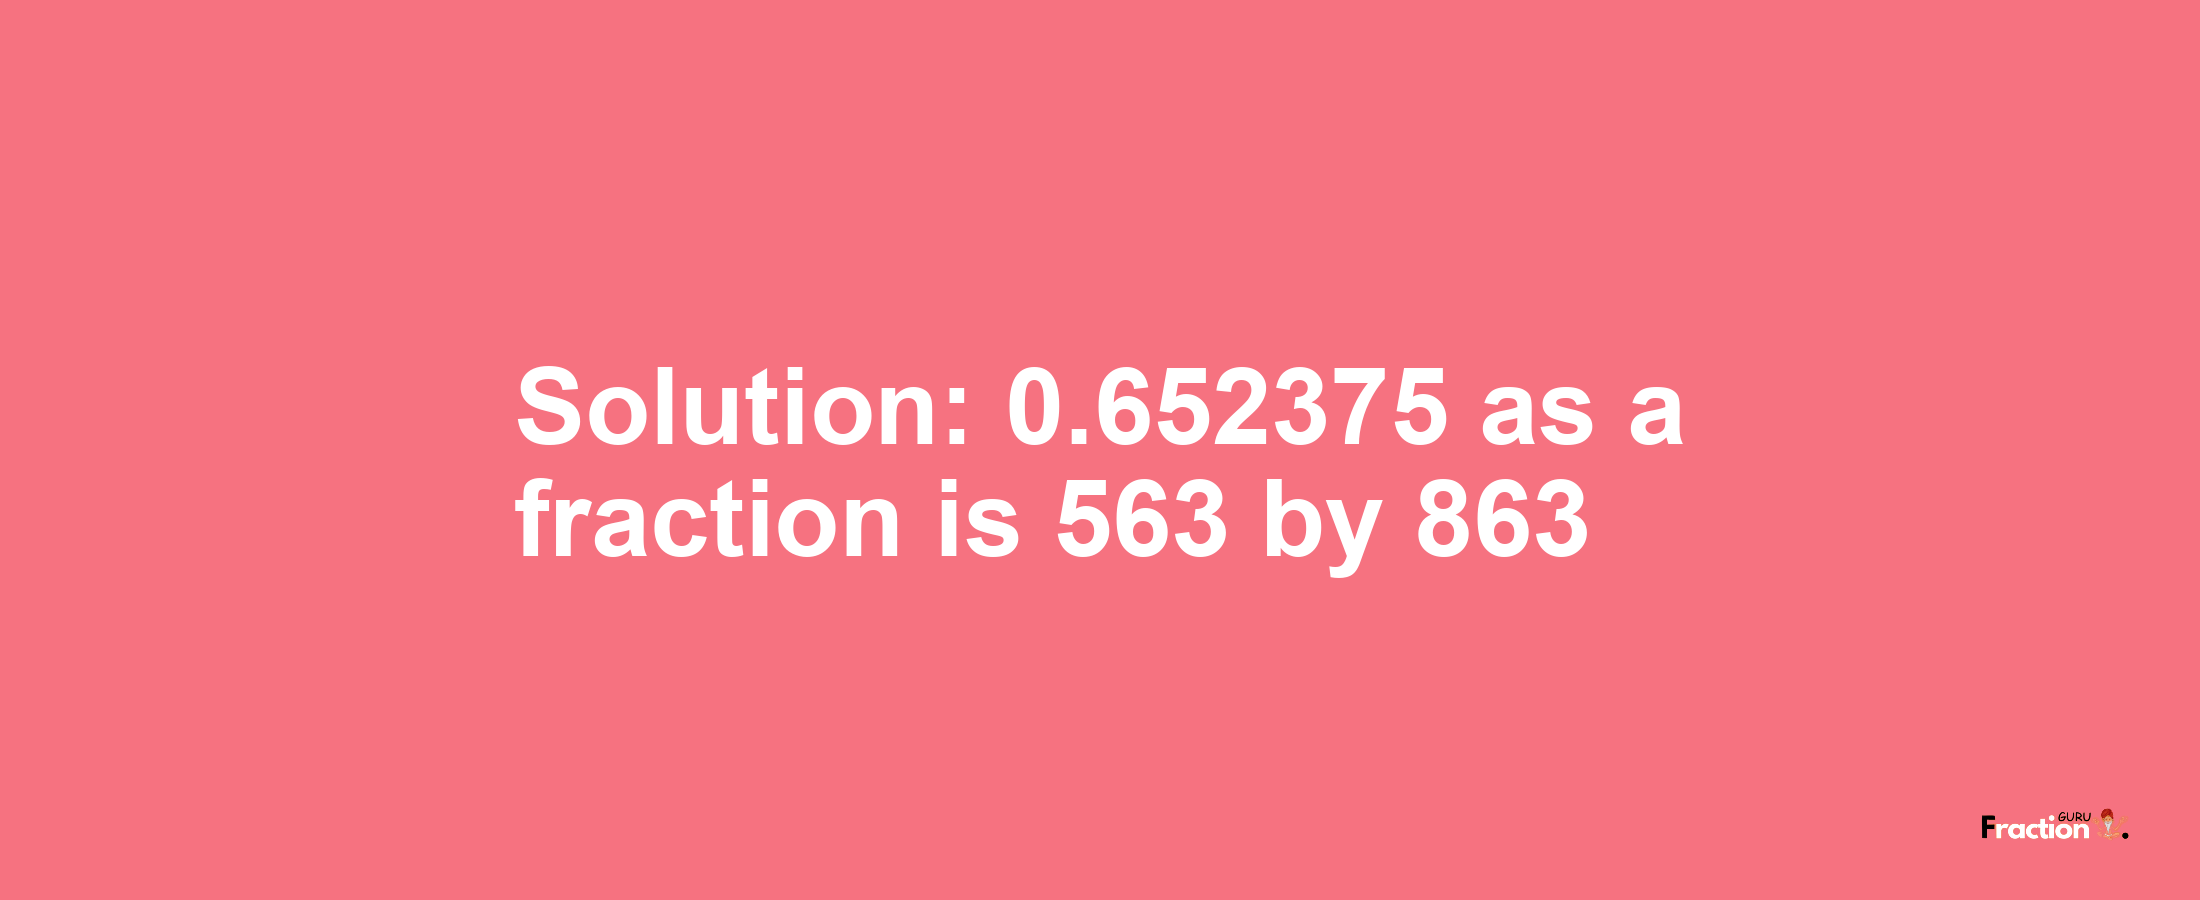 Solution:0.652375 as a fraction is 563/863